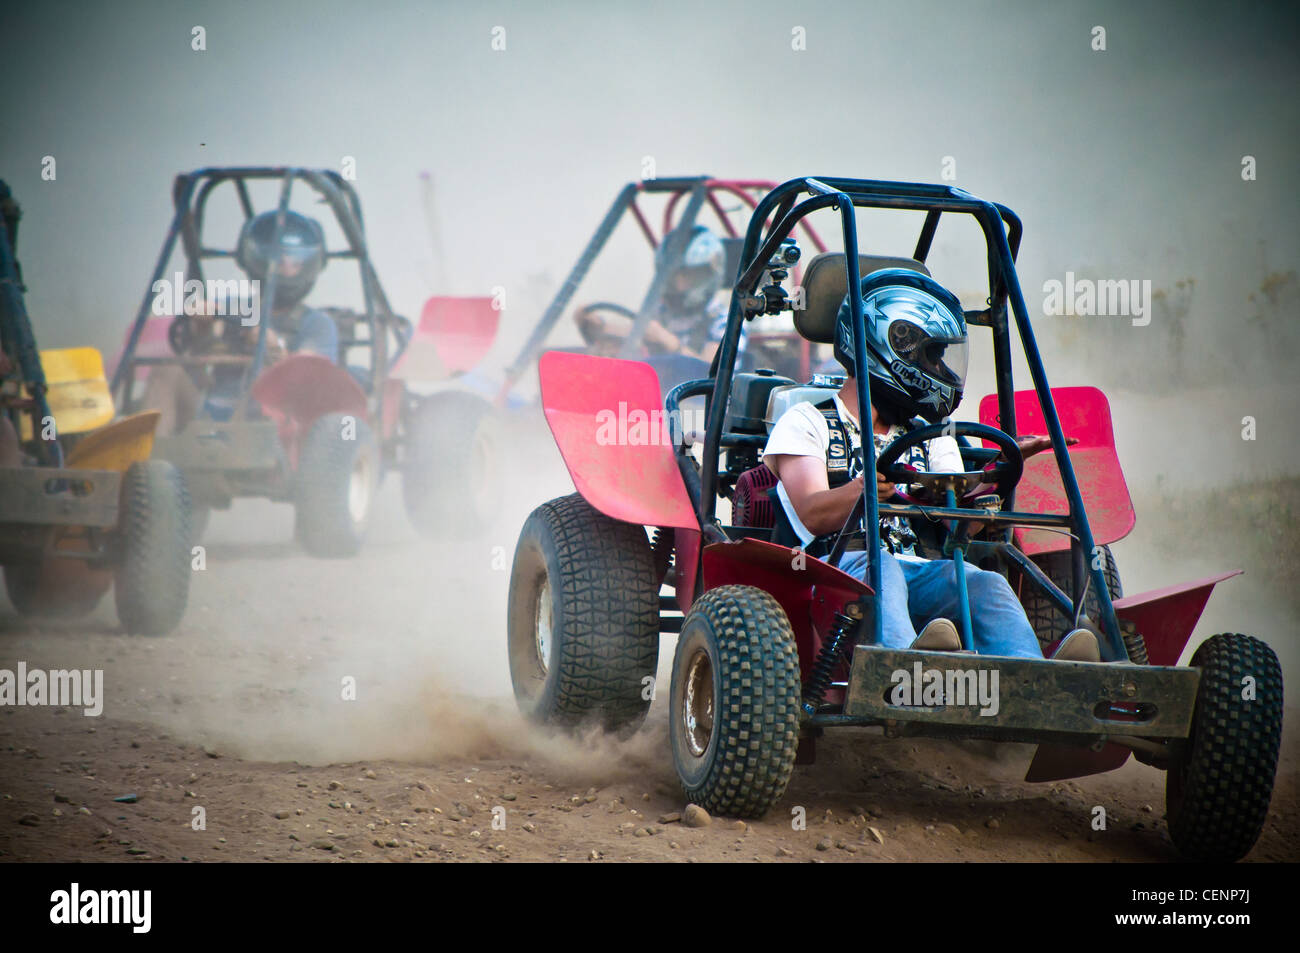 Dirt buggy in action in dusty conditions Nottinghamshire Stock Photo